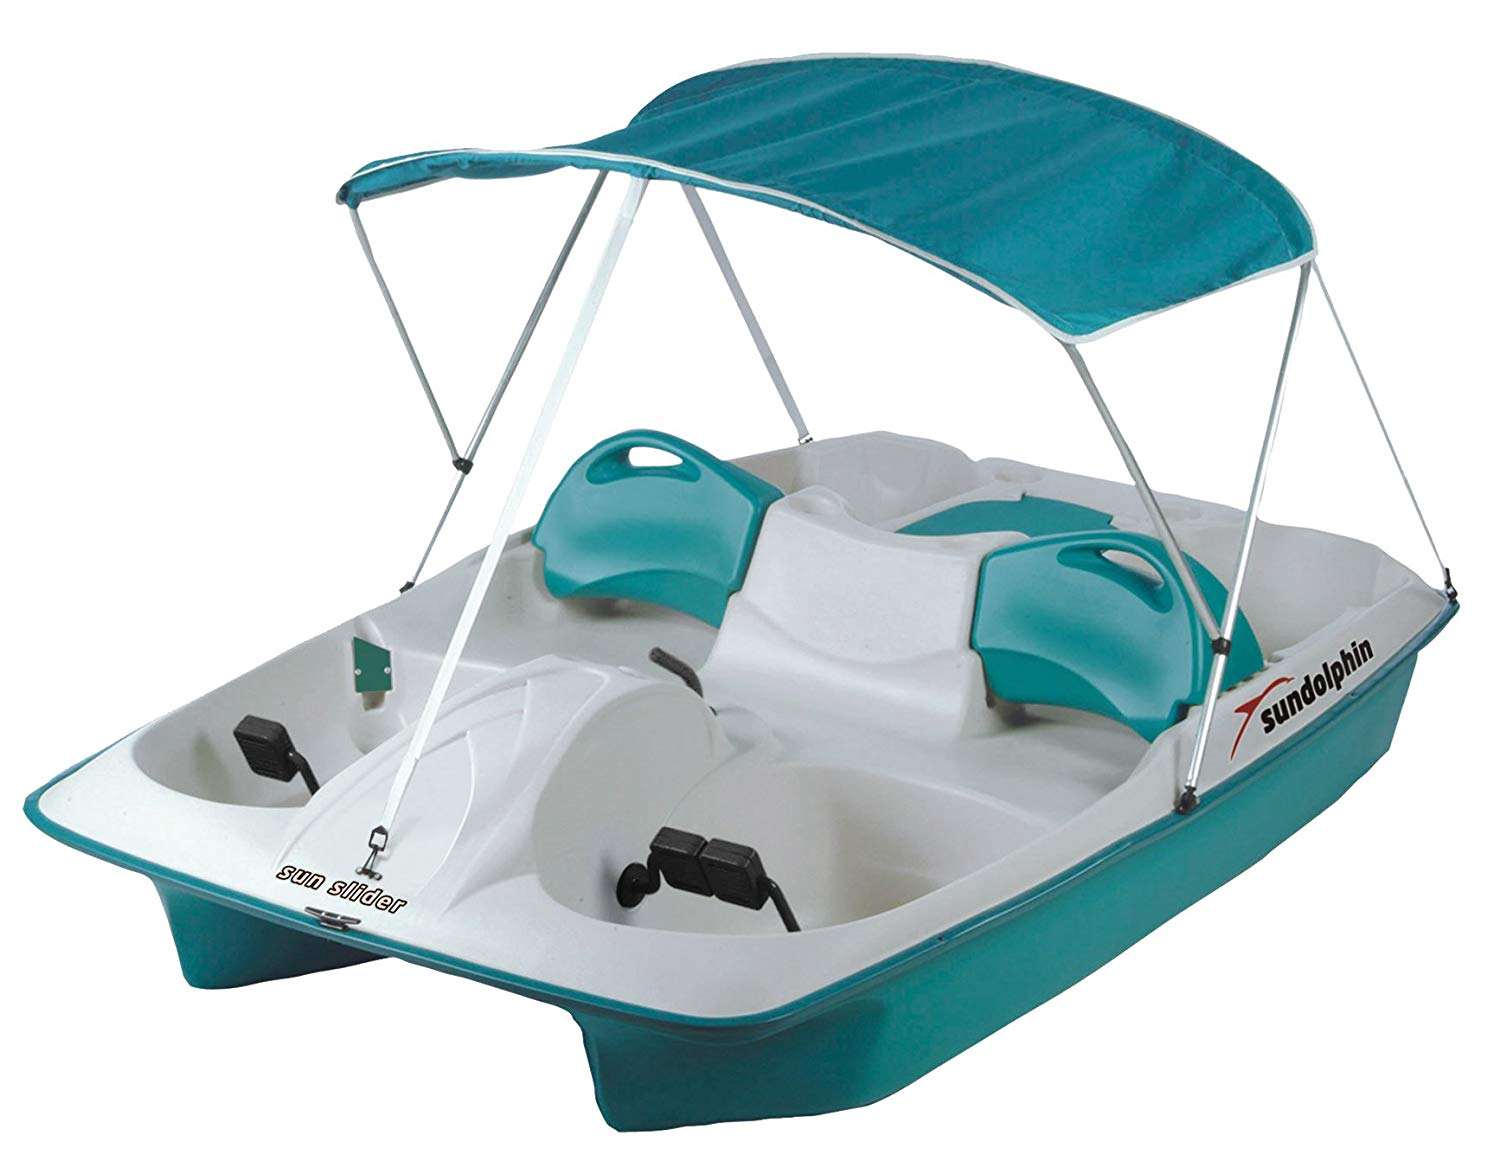 Sun-Dolphin-Sun-Slider-5-Seat-Pedal-Boat-with-Canopy